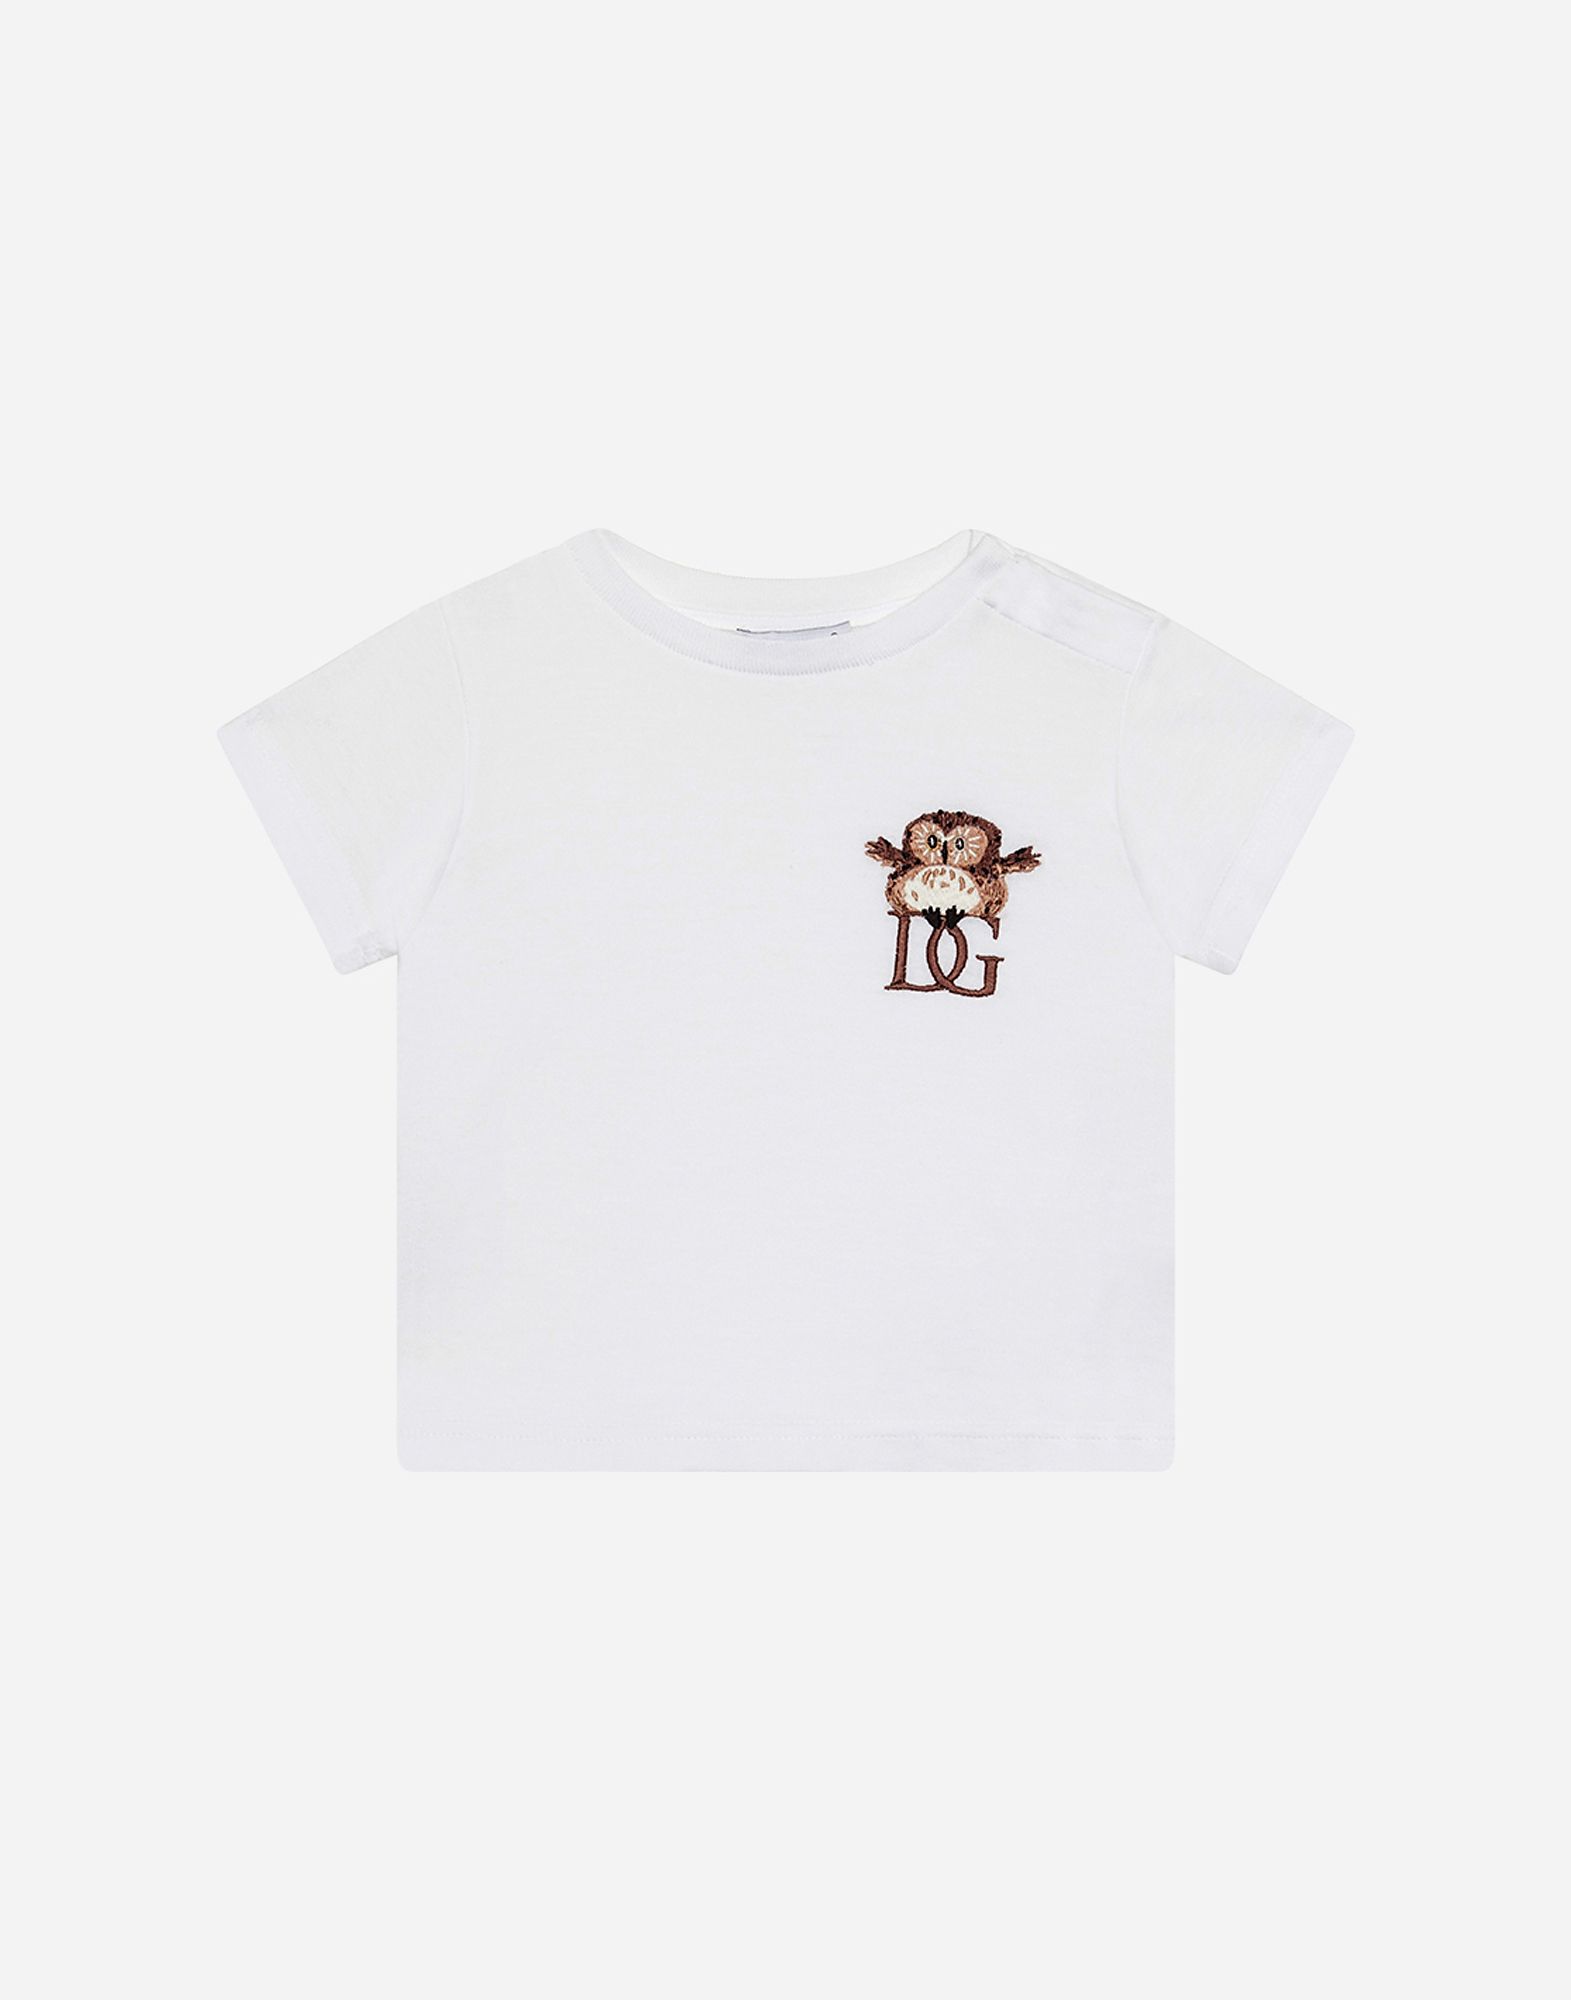 Dolce & Gabbana Kids' Jersey T-shirt With Dg Owlet Embroidery